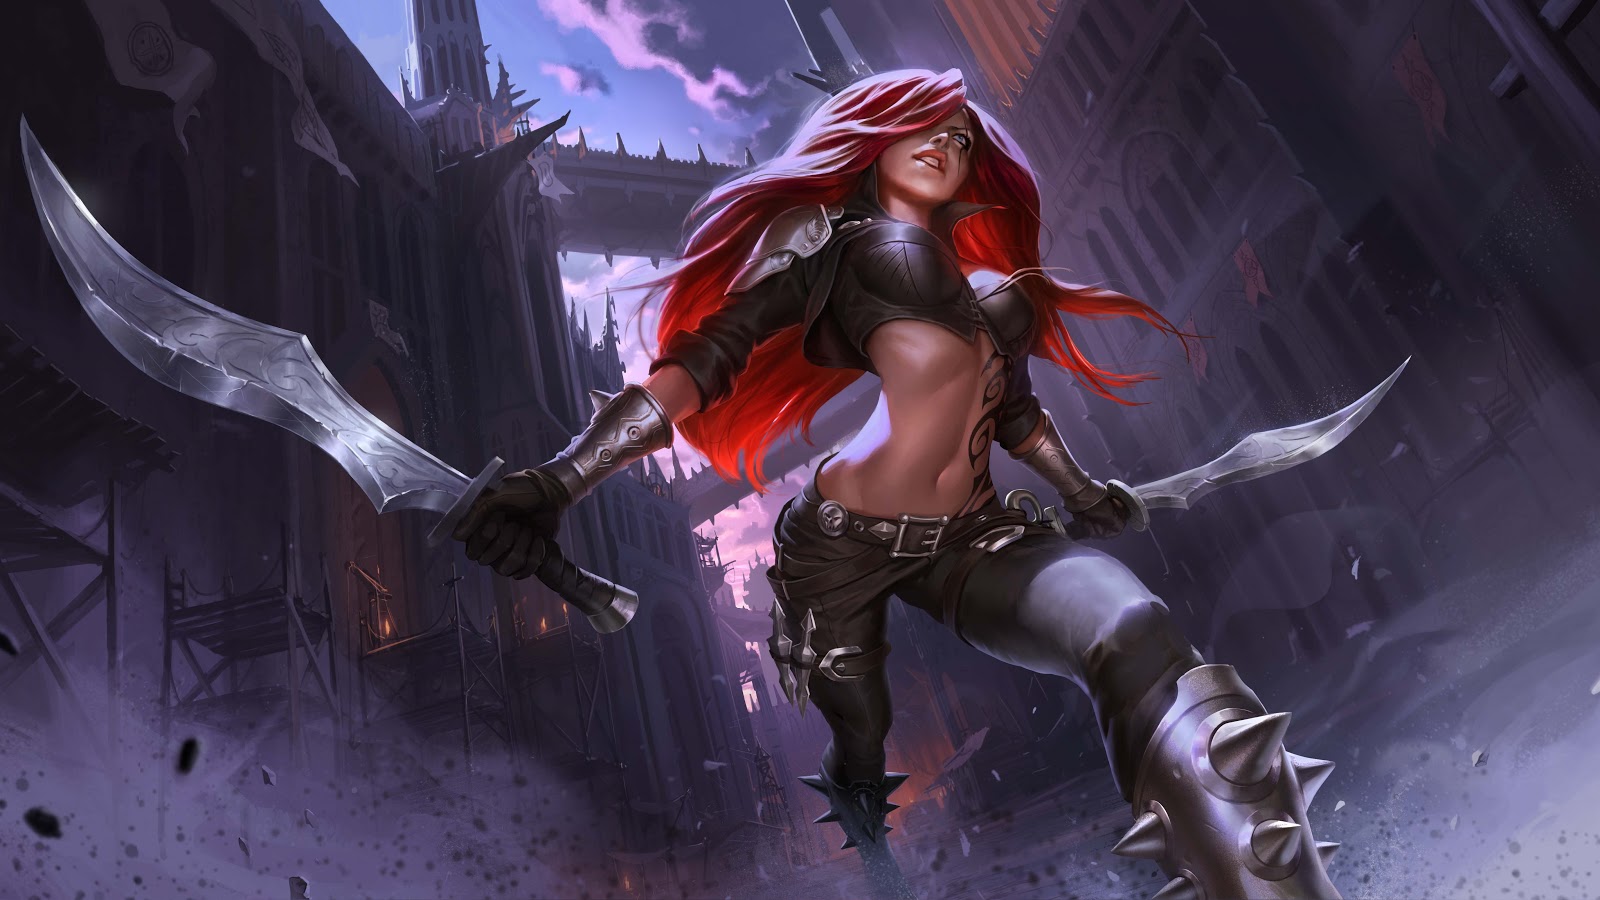 Katarina stands ready for battle, her arms outstretched with a blade in each hand.